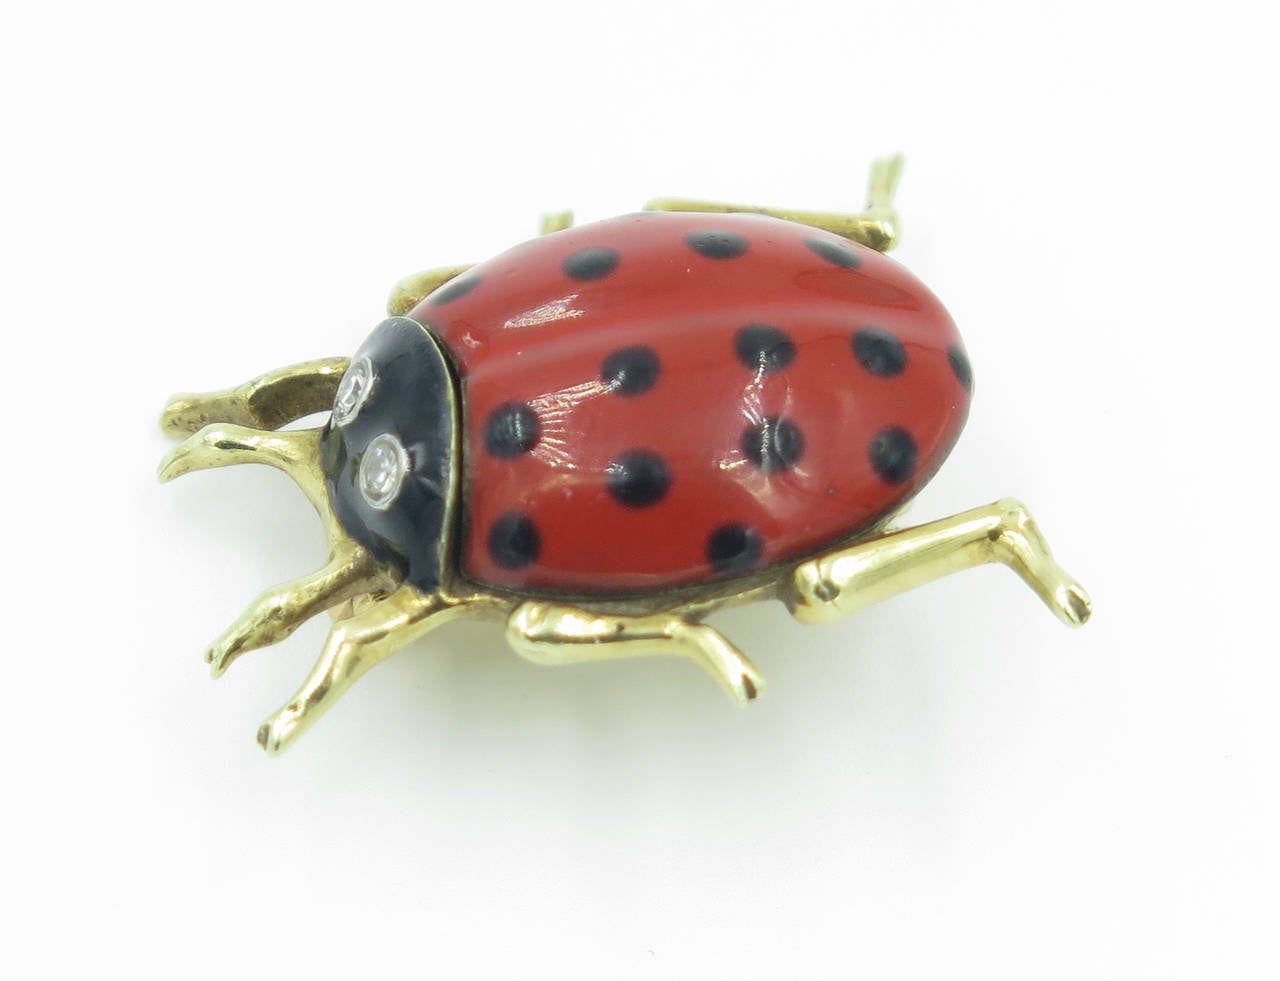 A 14 karat yellow gold, enamel and diamond ladybug brooch.  Cartier.  Signed 14K Cartier 10205.  The body is enameled red with black dots the eyes are each collet set with a single cut diamond.  The brooch has a gross weight of approximately 9.4